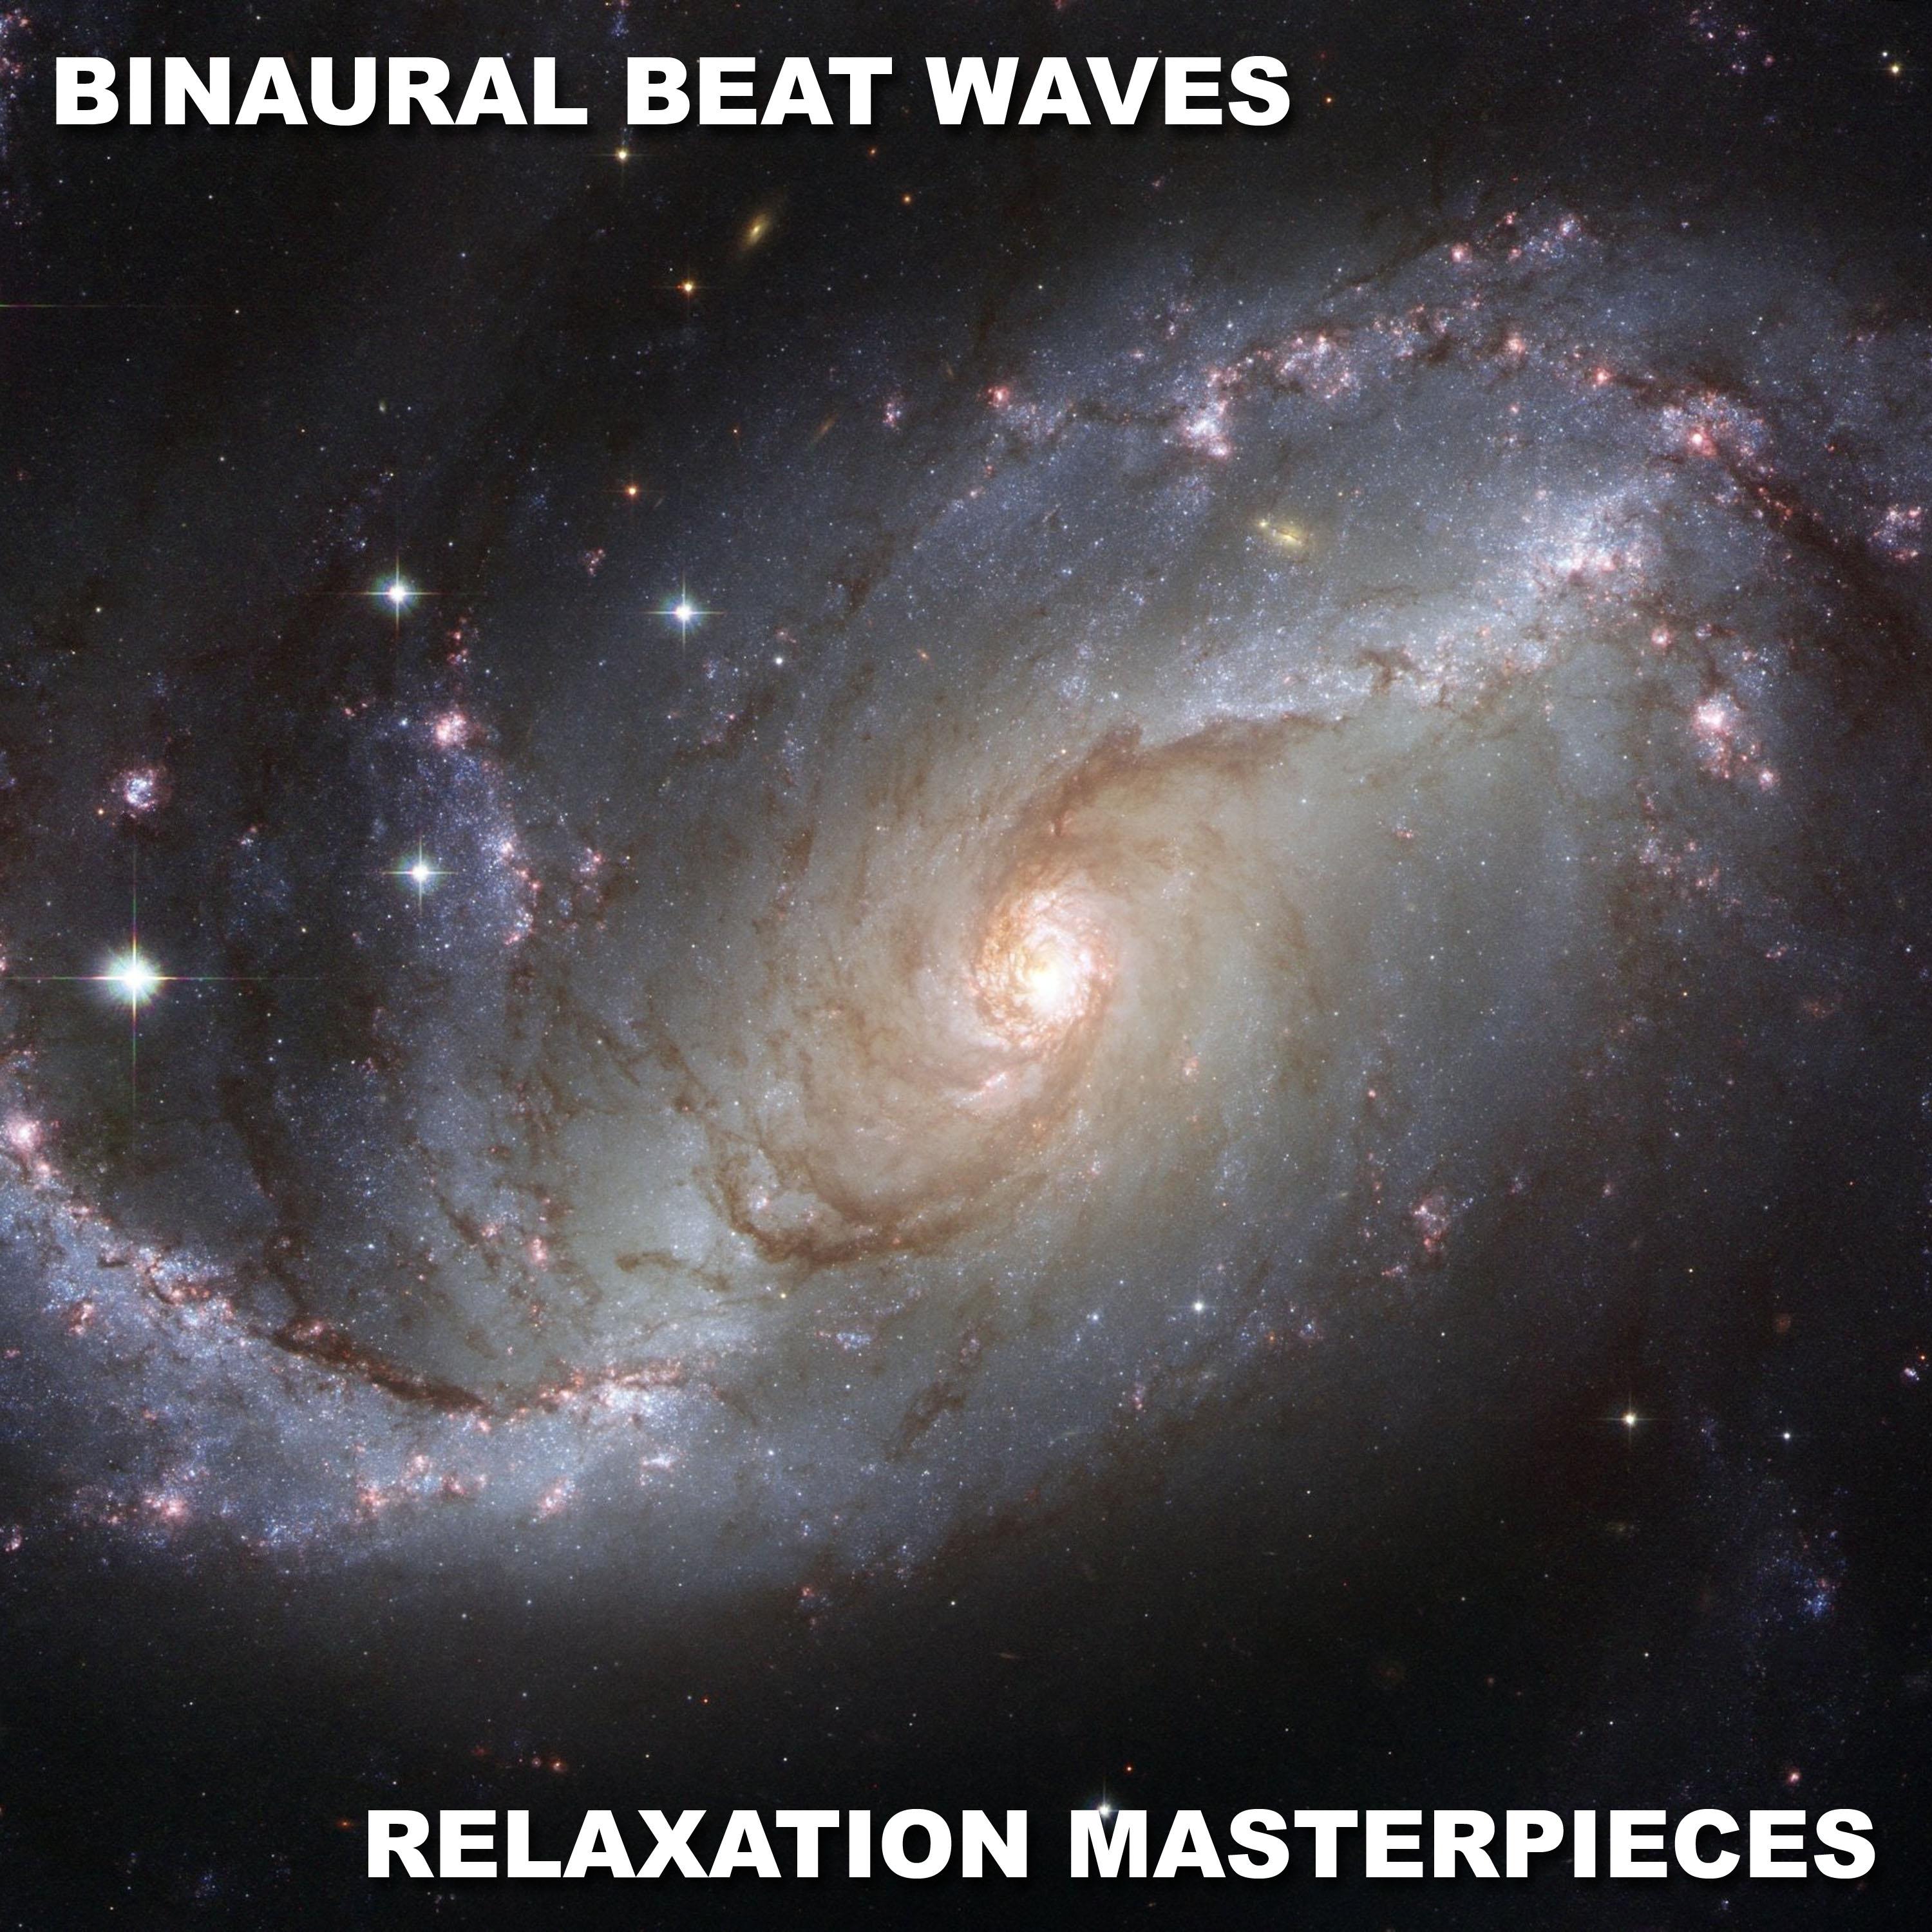 14 Binaural Beat Waves Relaxation Masterpieces